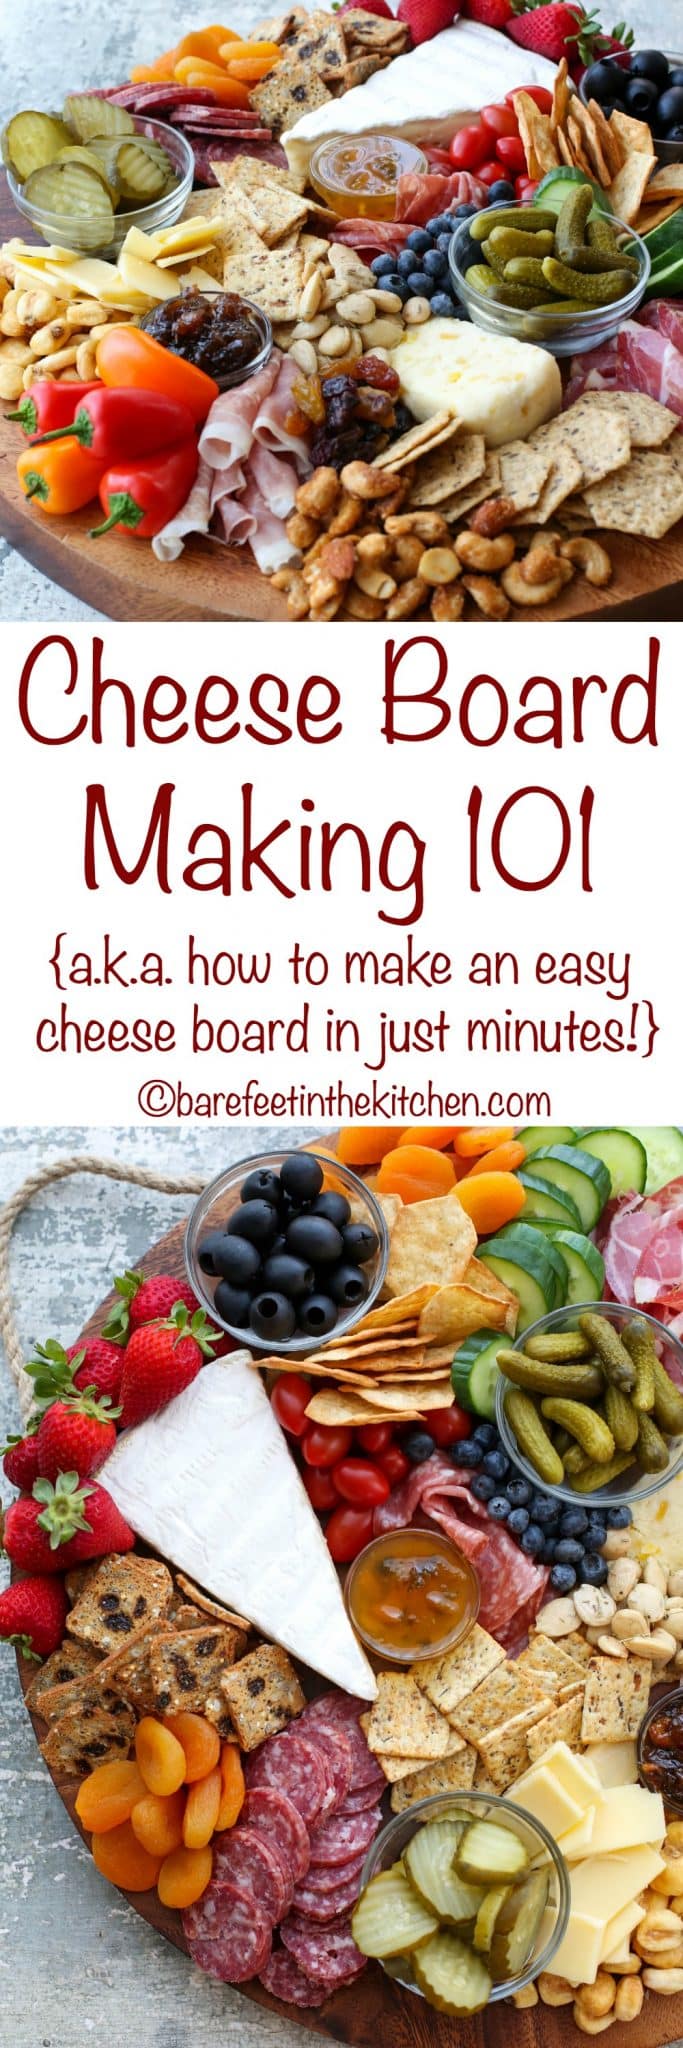 How to Make a Cheese Plate (with step-by-step photos!)